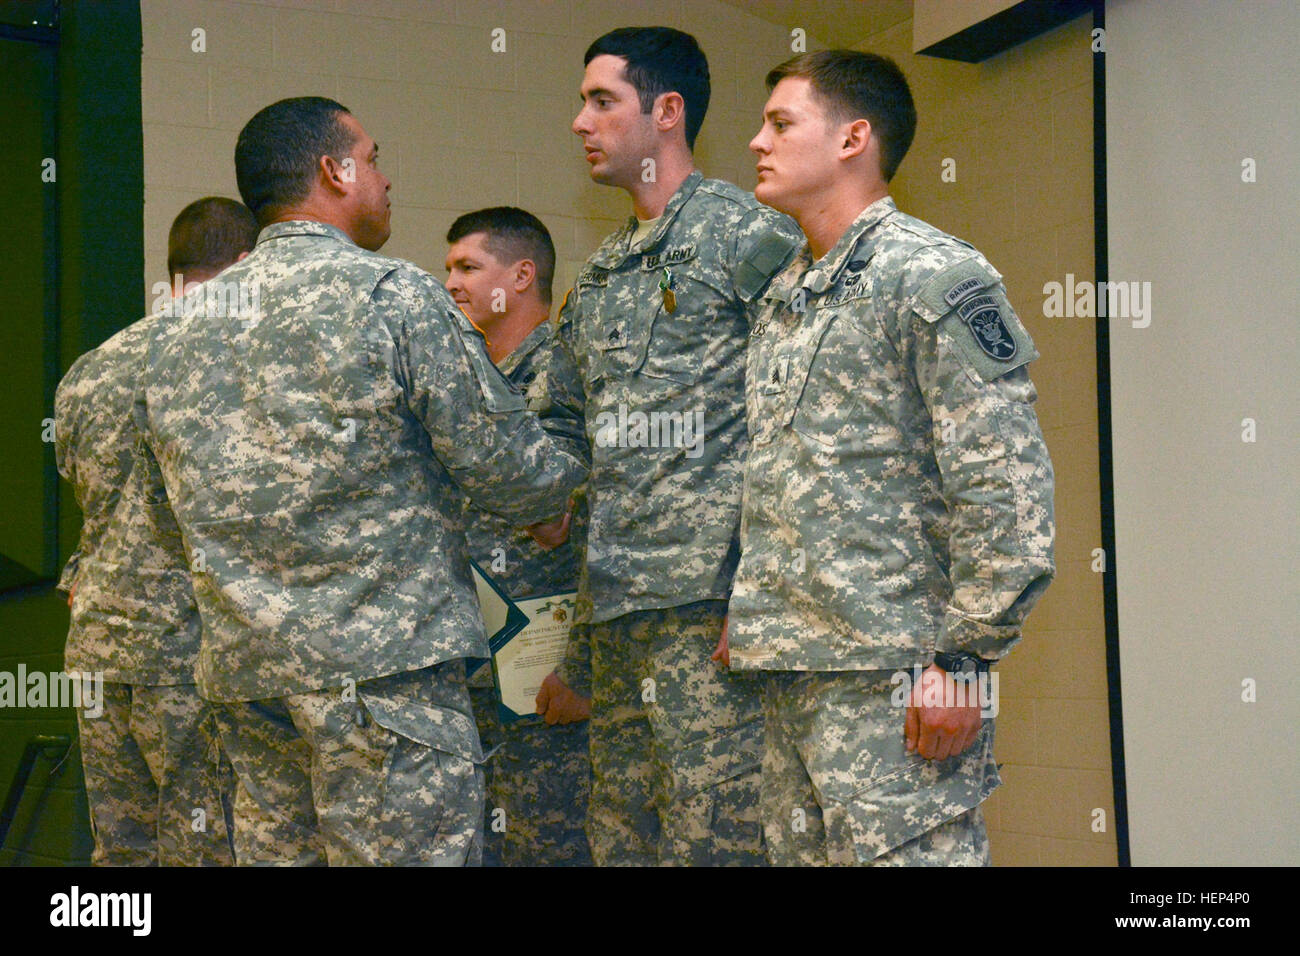 Col. Miguel A. Correa, commander of the 1st Special Warfare Training Group (Airborne), United States Army John F. Kennedy Special Warfare Center and School presents the Army Commendation Medal to Sgt. Nathan R. Foster and Sgt. Matthew A. Clermonth on February 12, at the Bank Hall Auditorium. The two Soldiers were recognized for their heroic actions, which directly resulted in saving the life of a fellow Soldier who collapsed during early morning training, November 2014. Foster and Clermon are students in the 18 Delta Special Forces Medical Sergeant Course at USAJFKSWCS. Special Forces medical  Stock Photo